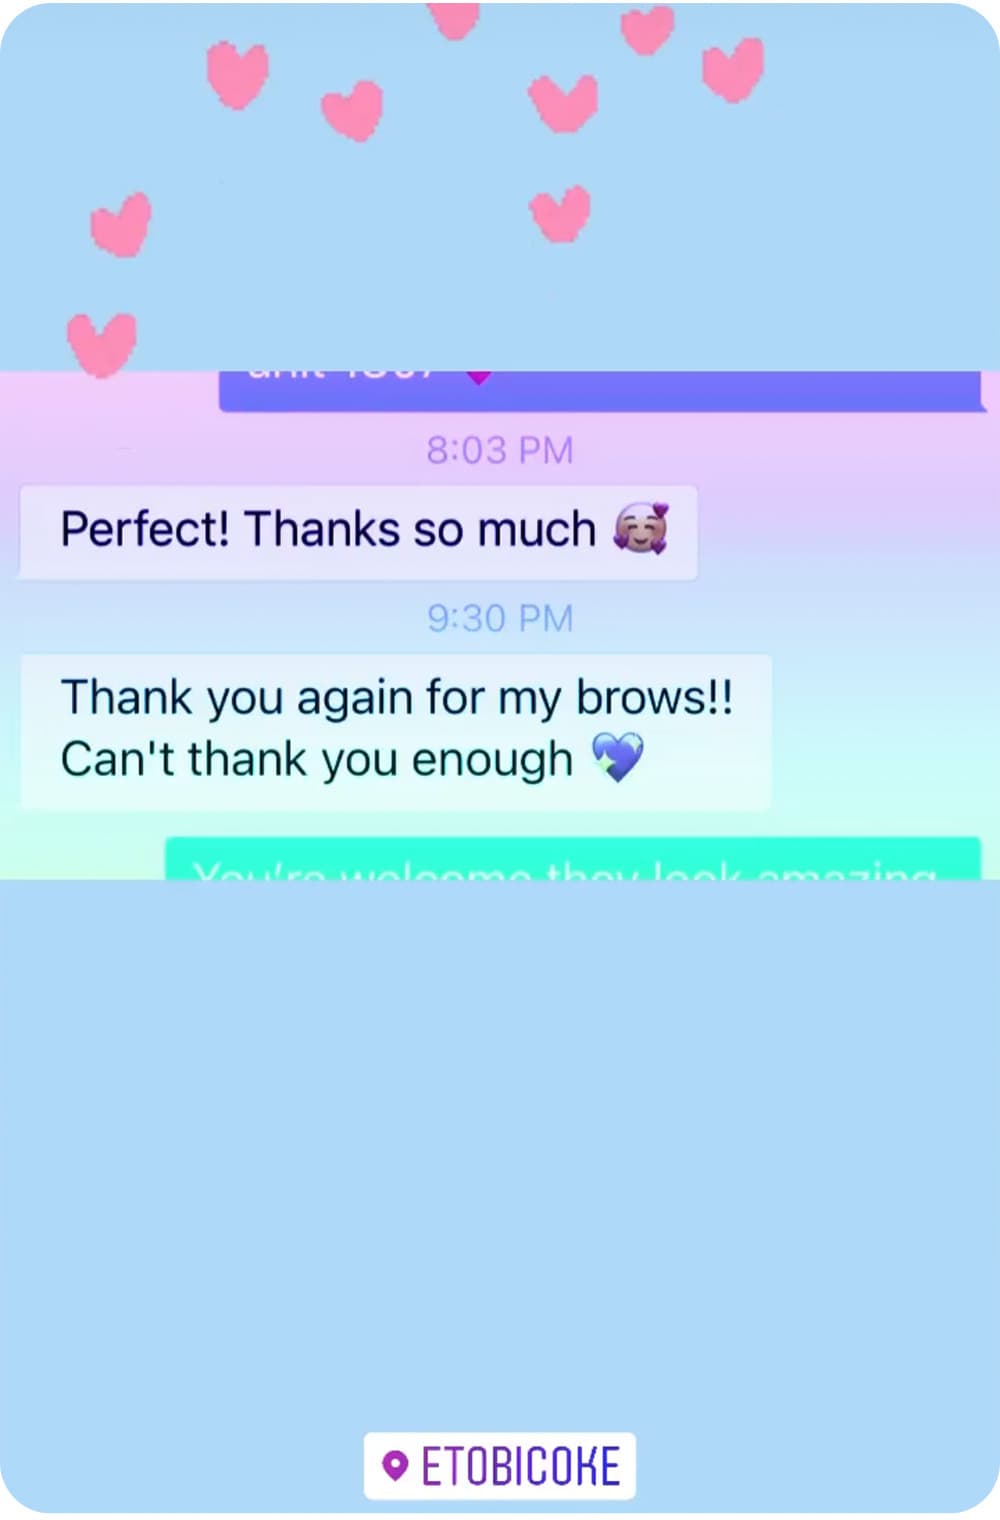 perfect thanks so much, thank you again for my brows!! cant thank you enough.